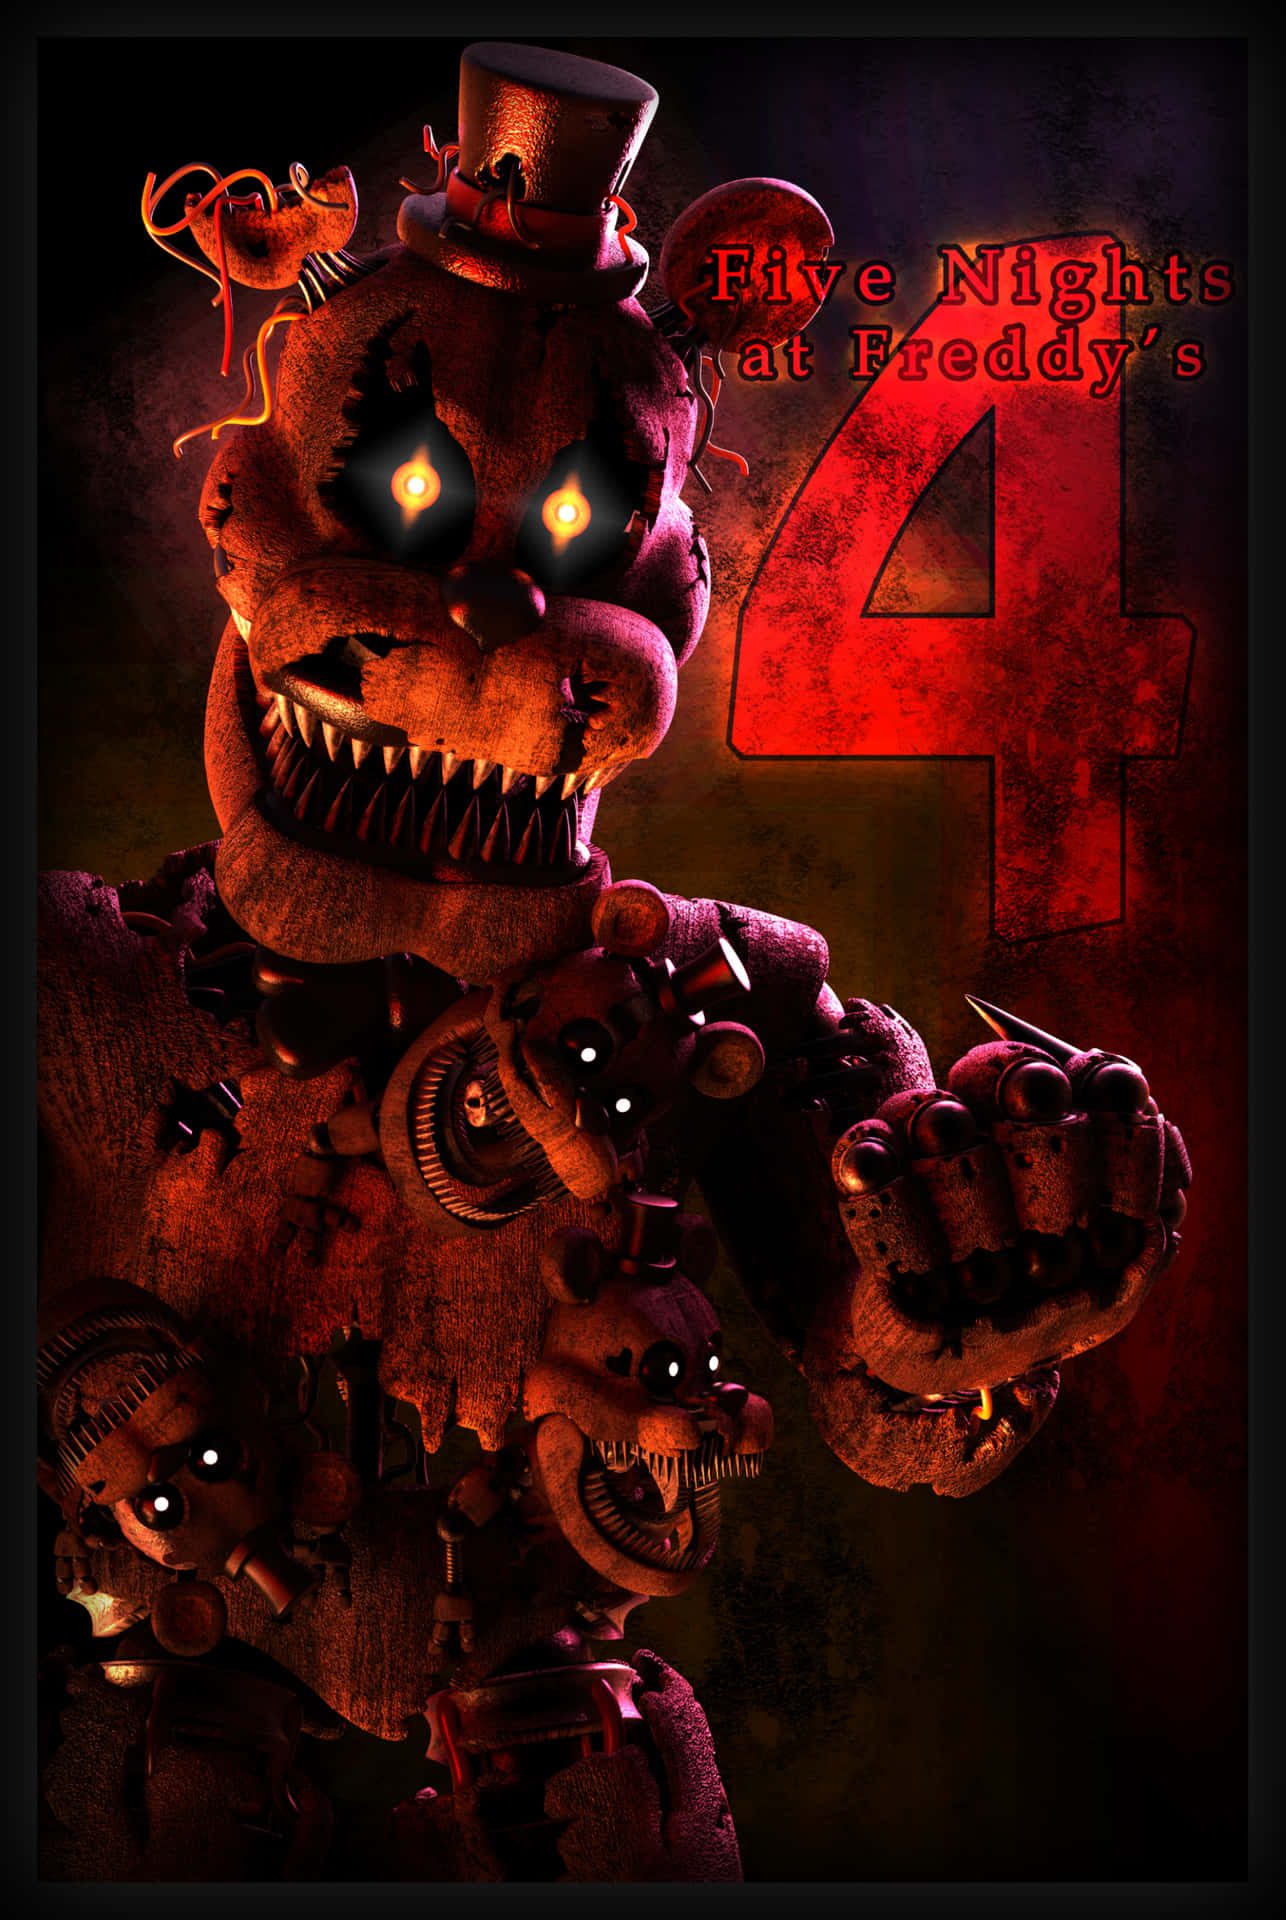 "Explore the secrets of the Five Nights at Freddy's world!"